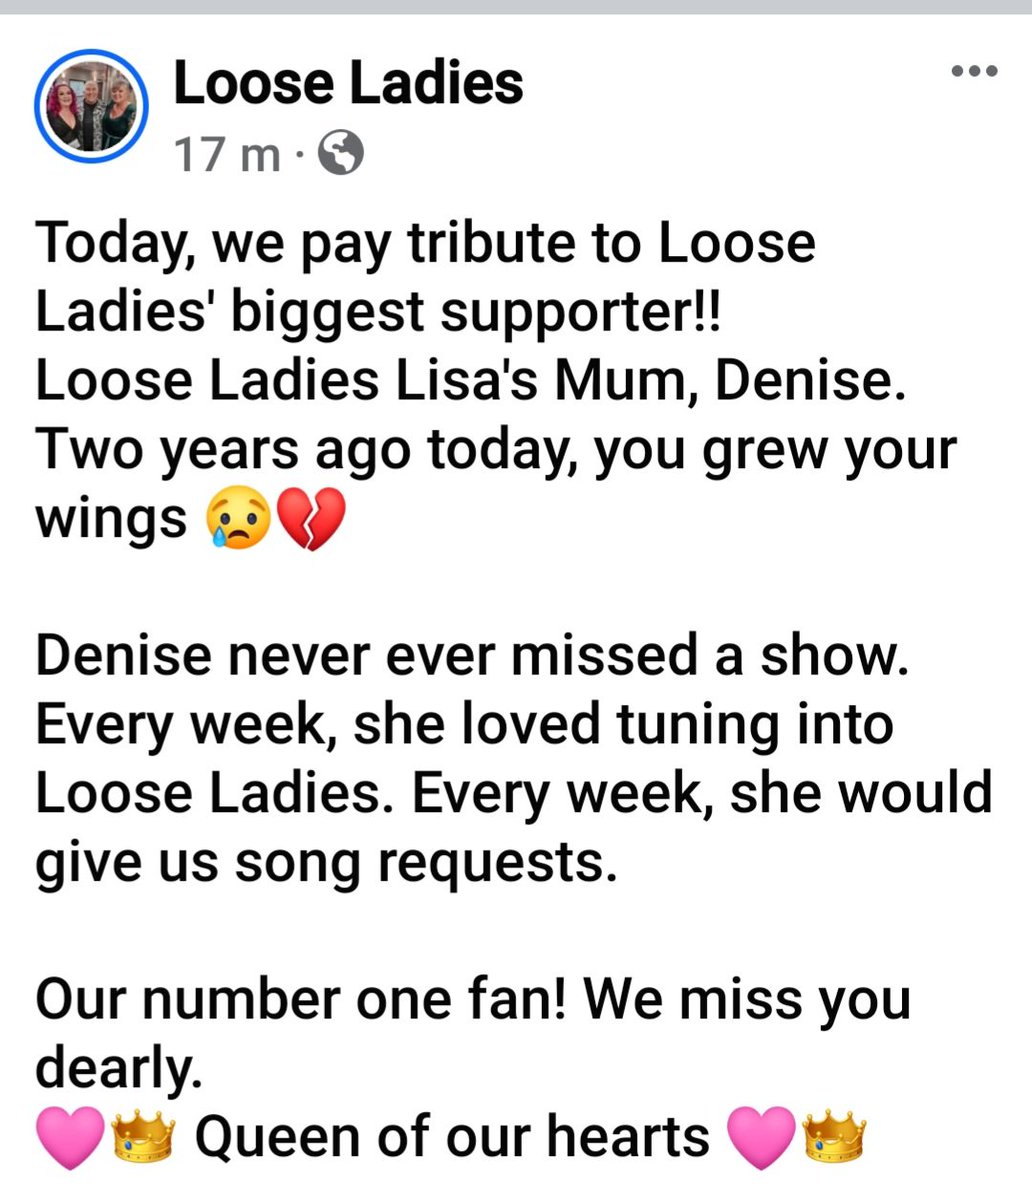 Our number one fan! We miss you dearly.
🩷👑 Queen of our hearts 🩷👑

#missyou #tribute #inmemory 
#queenofhearts #looseladieslive #looseladies